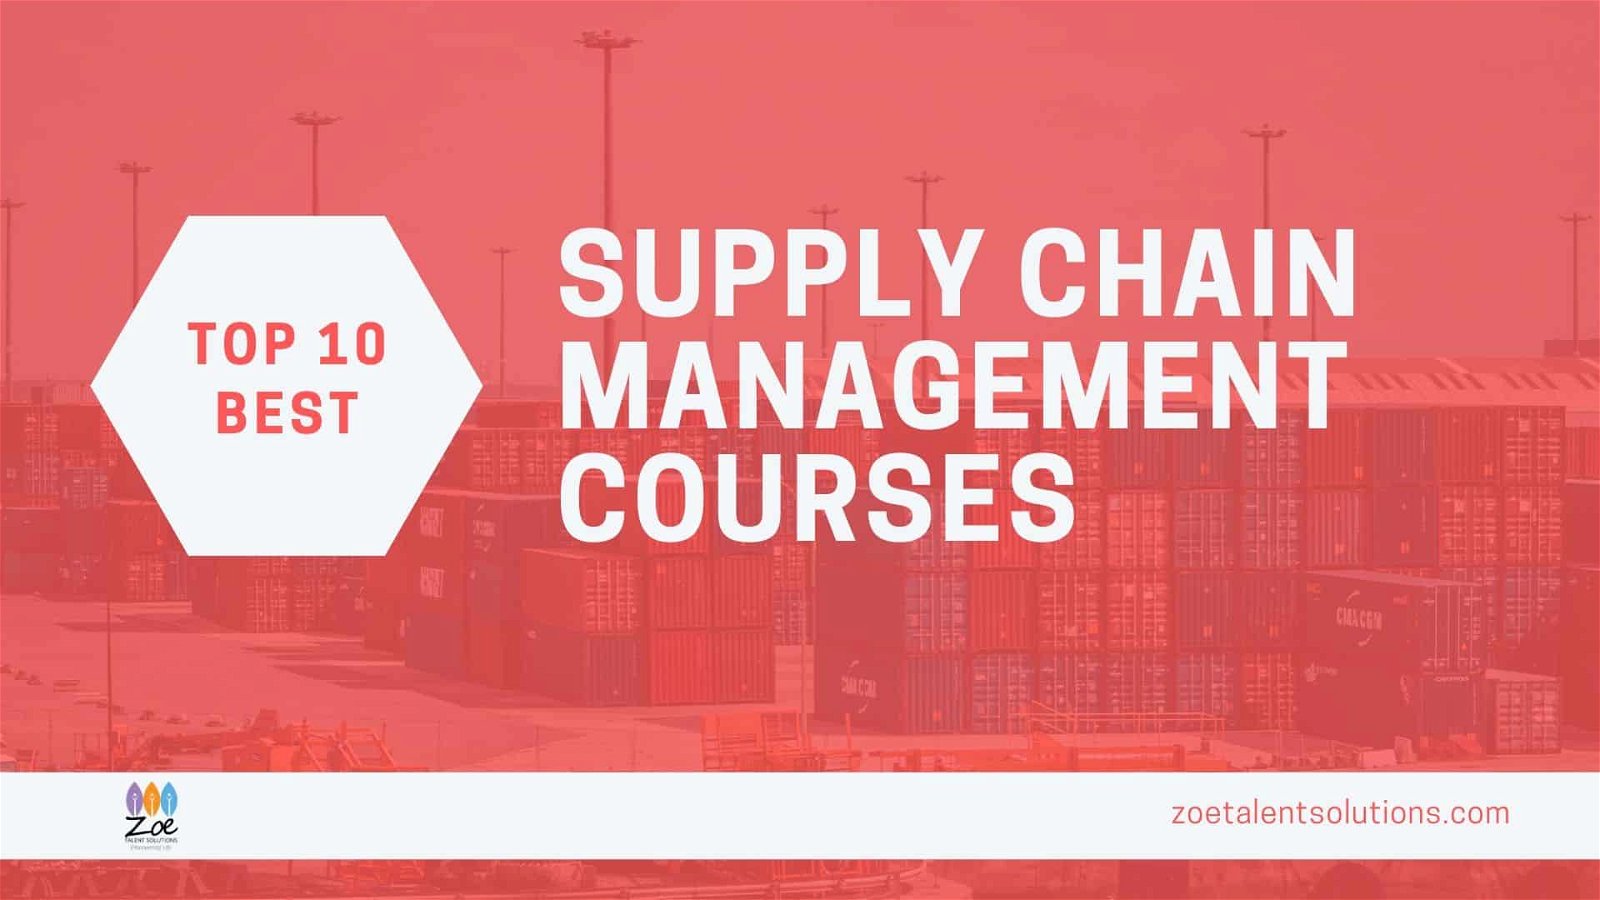 Top 10 Best Supply Chain Management Courses